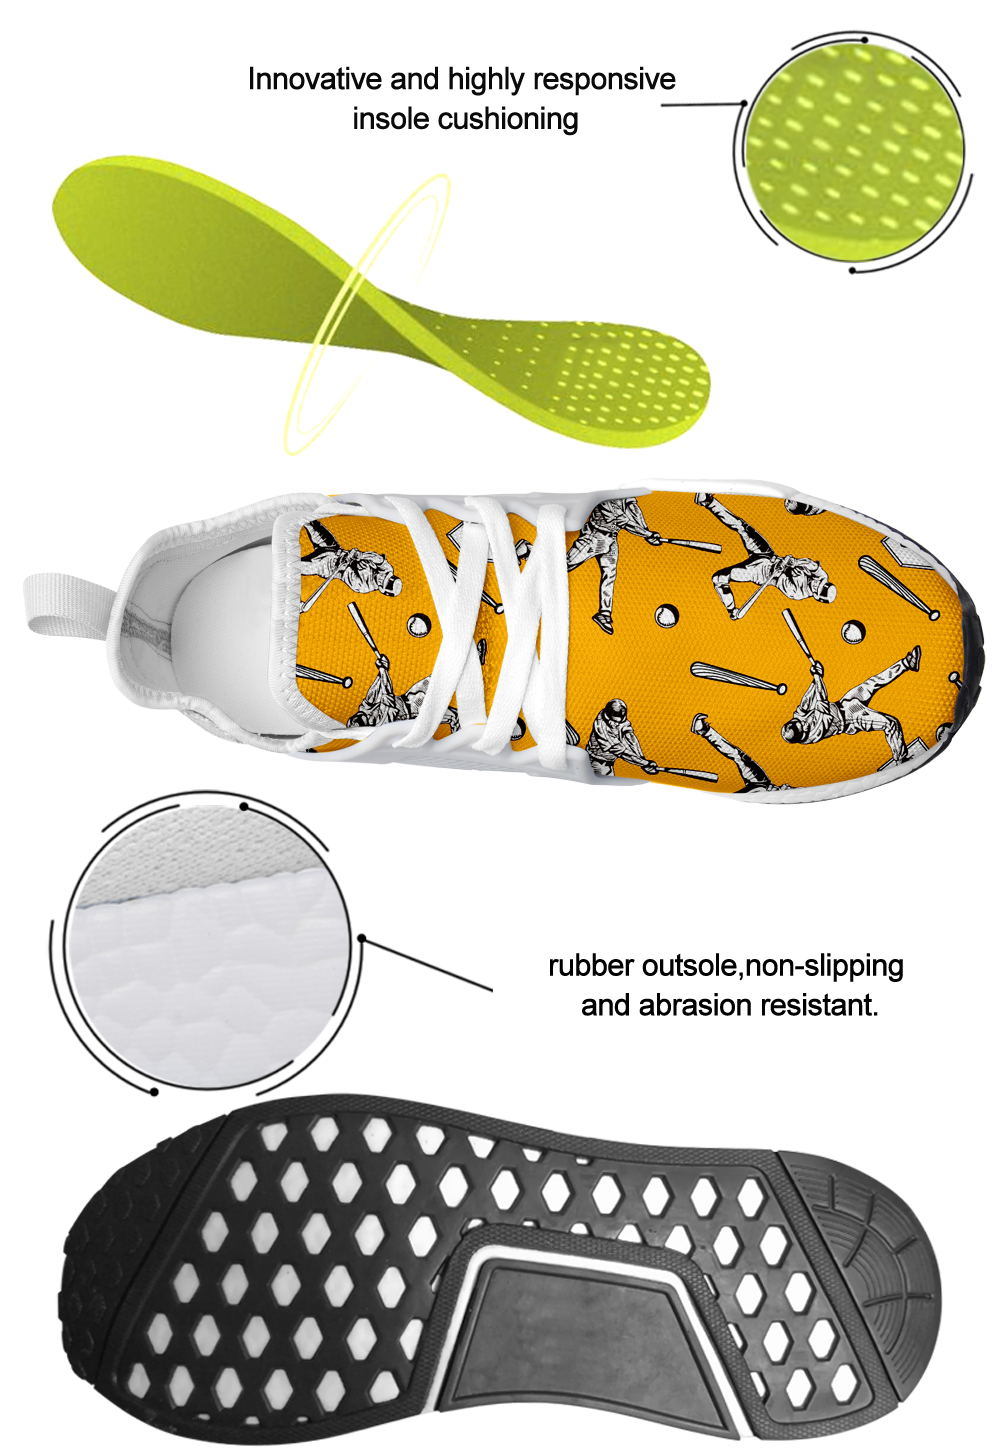 Custom Print on Demand Shoes for Team Baseball Nmd Design Your Own Fashion Sneakers Running Shoes